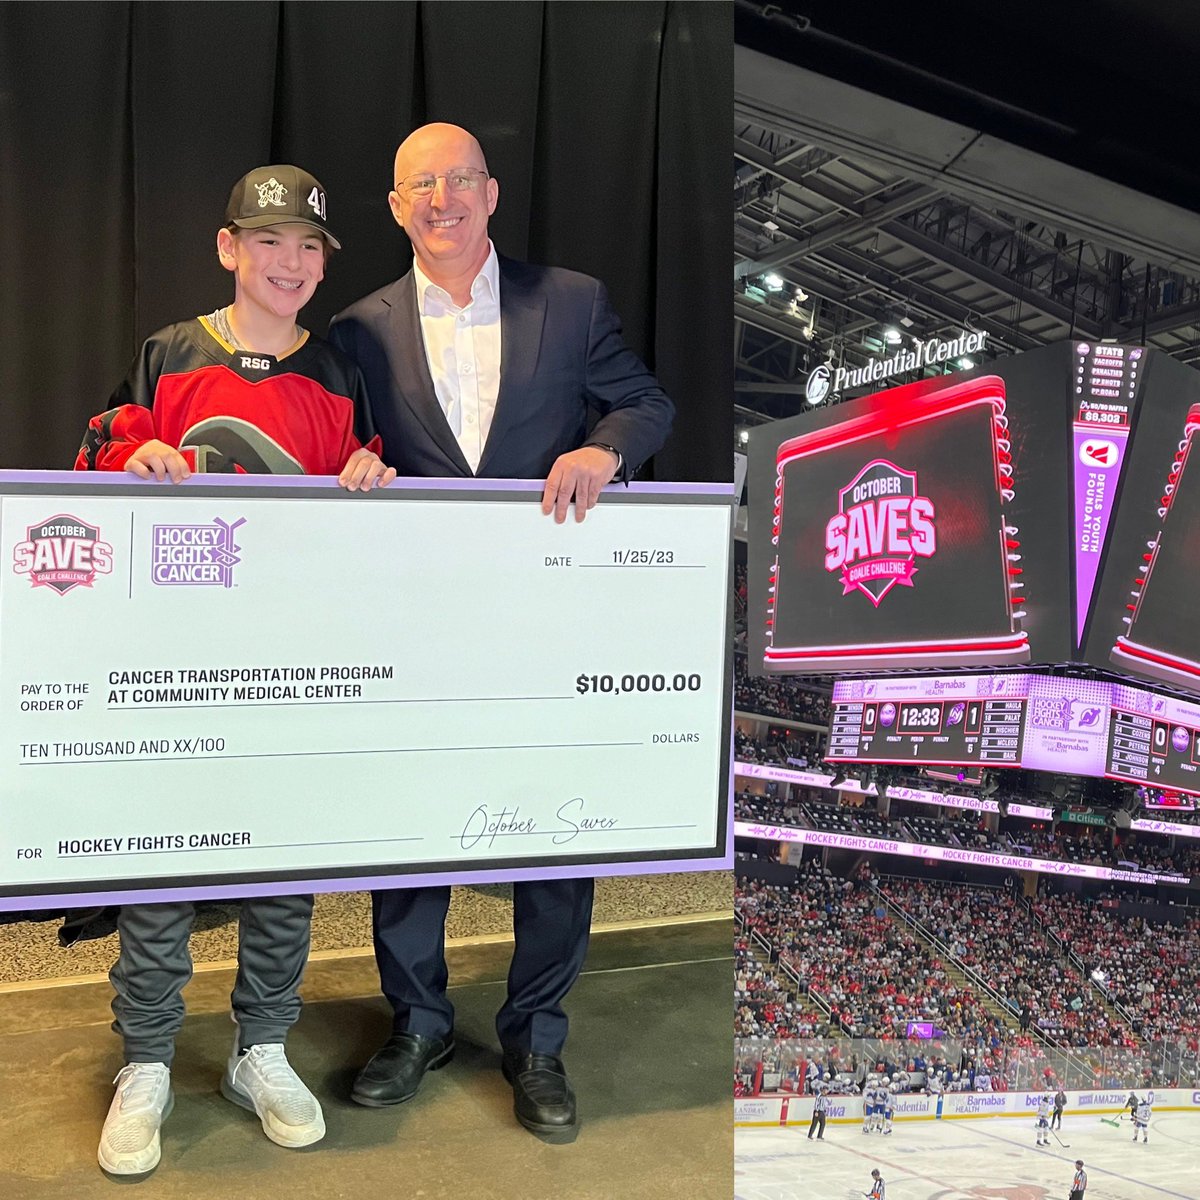 Thank you for helping transform cancer research and care. #HockeyFightsCancer @NJDevils @NHL @slibutti @RWJBarnabas